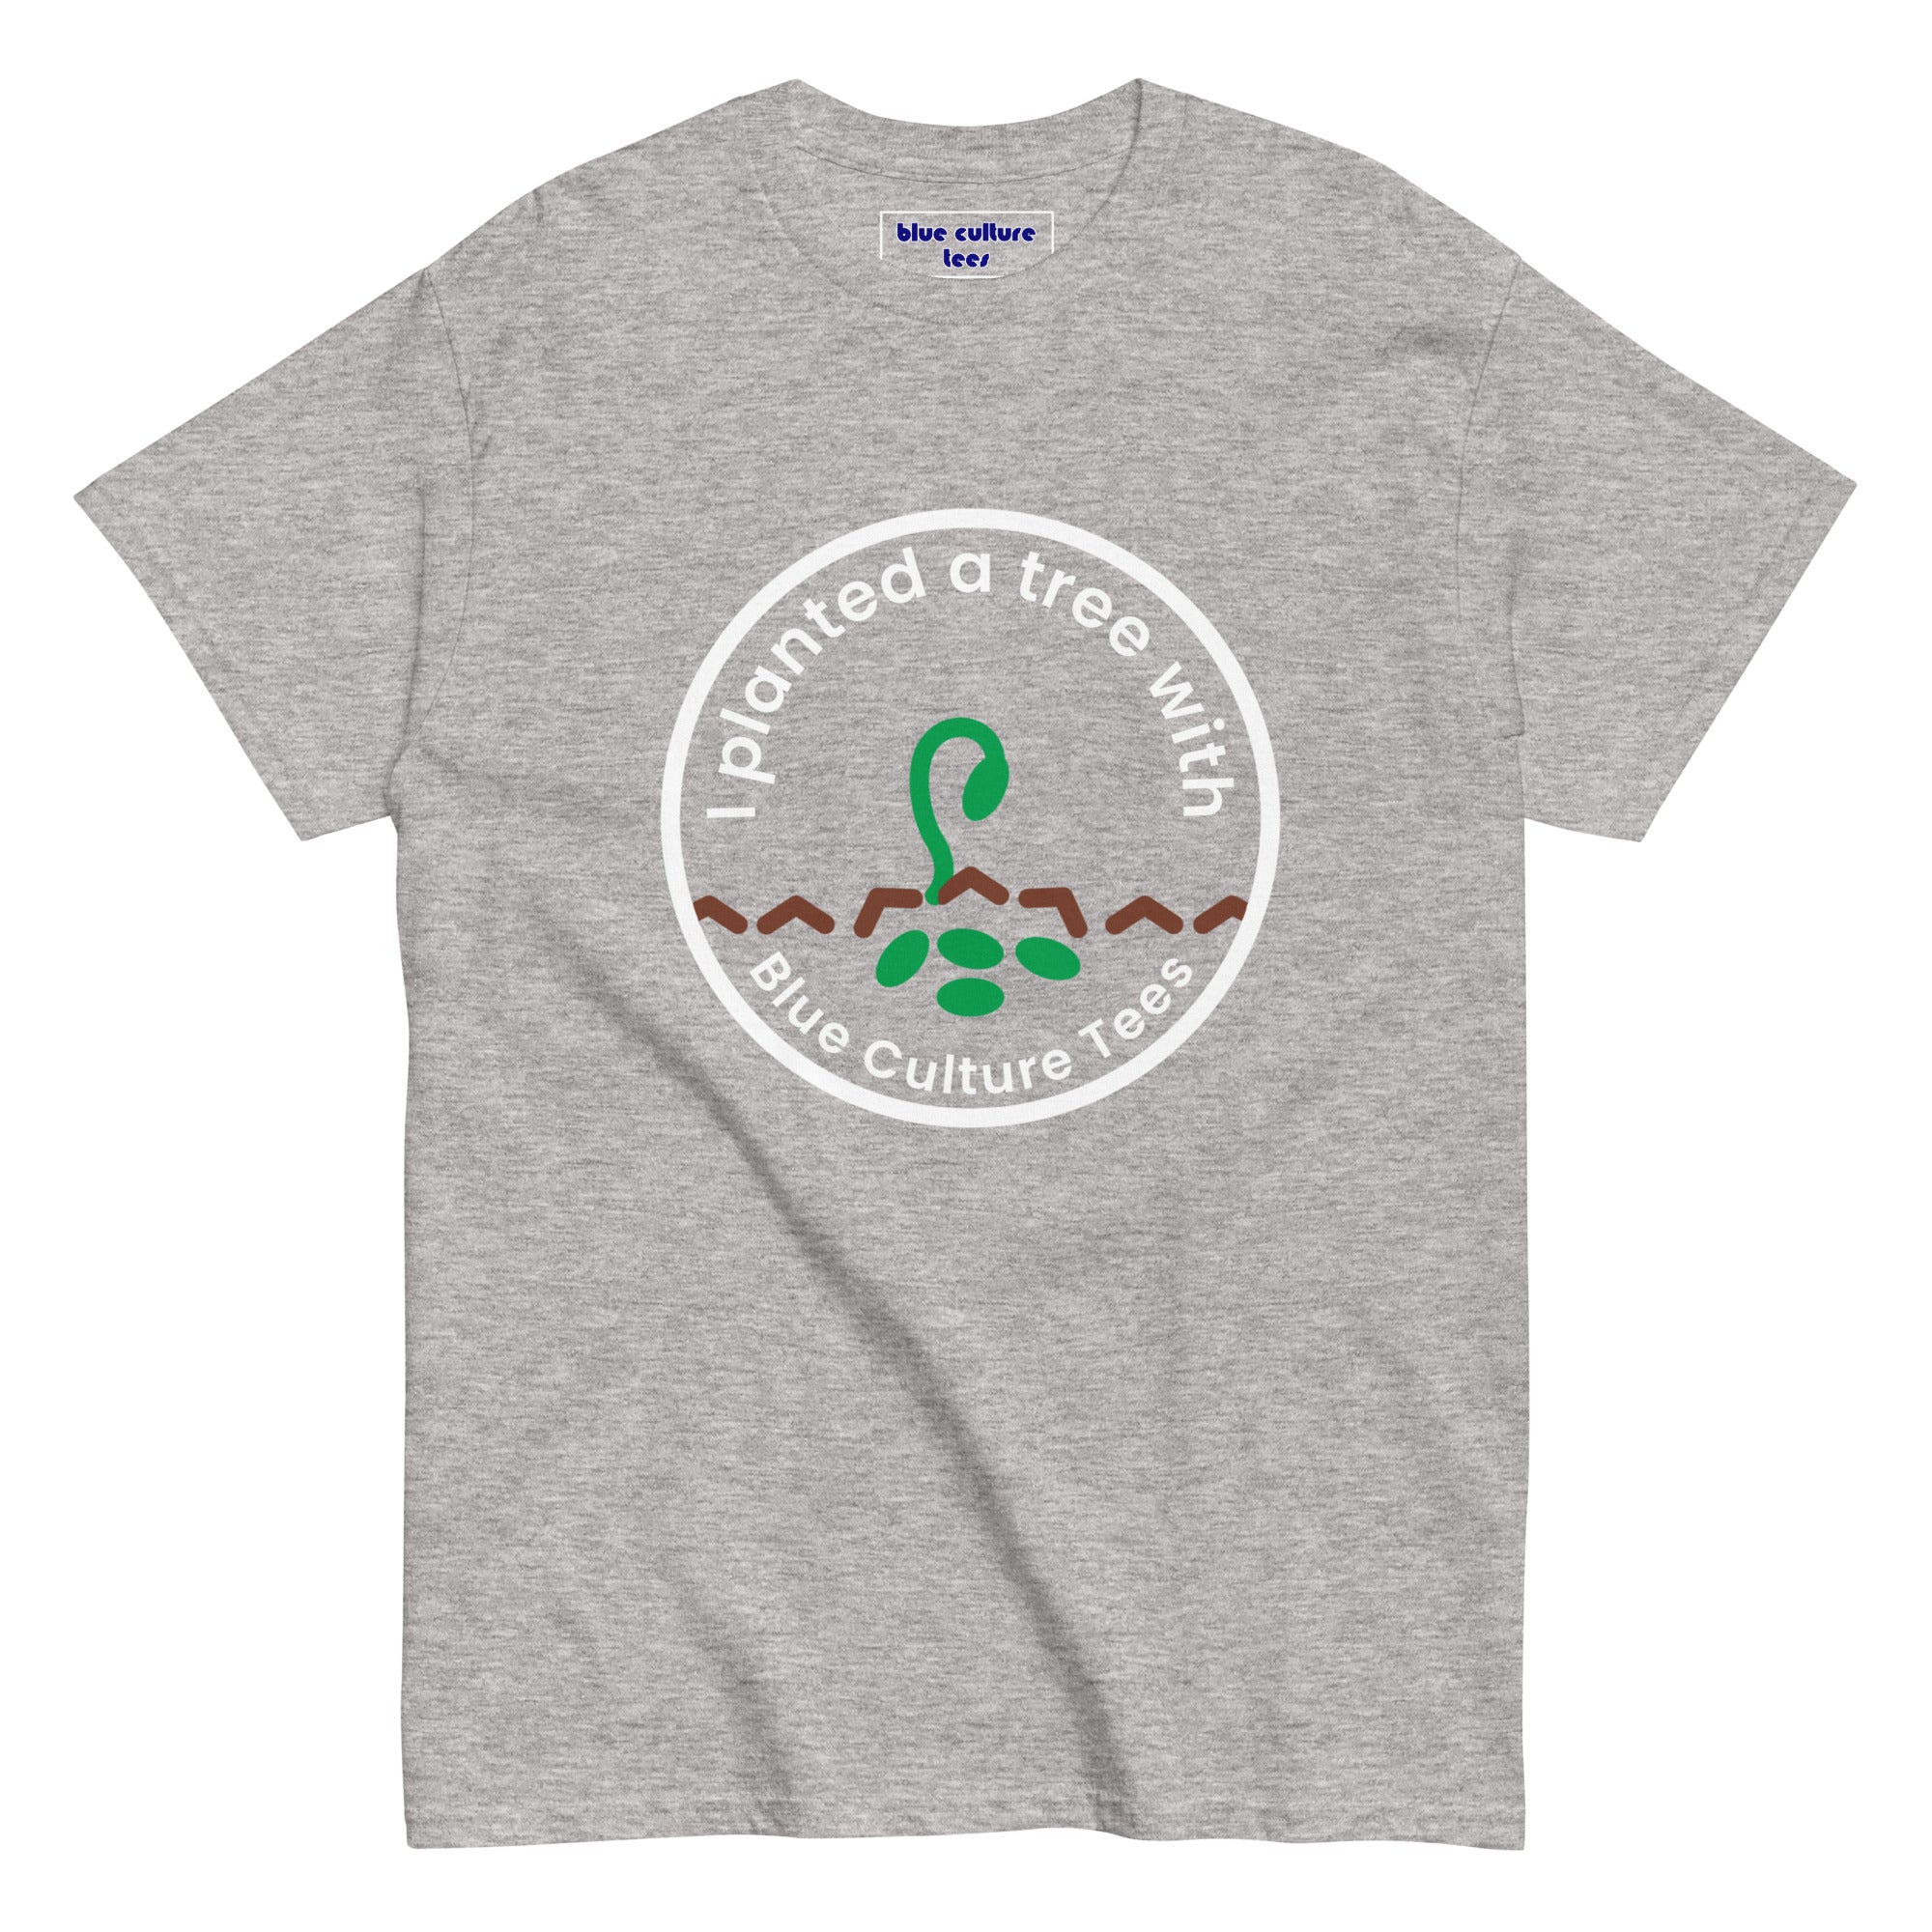 I Planted a Tree with Blue Culture Tees Circle T-Shirt